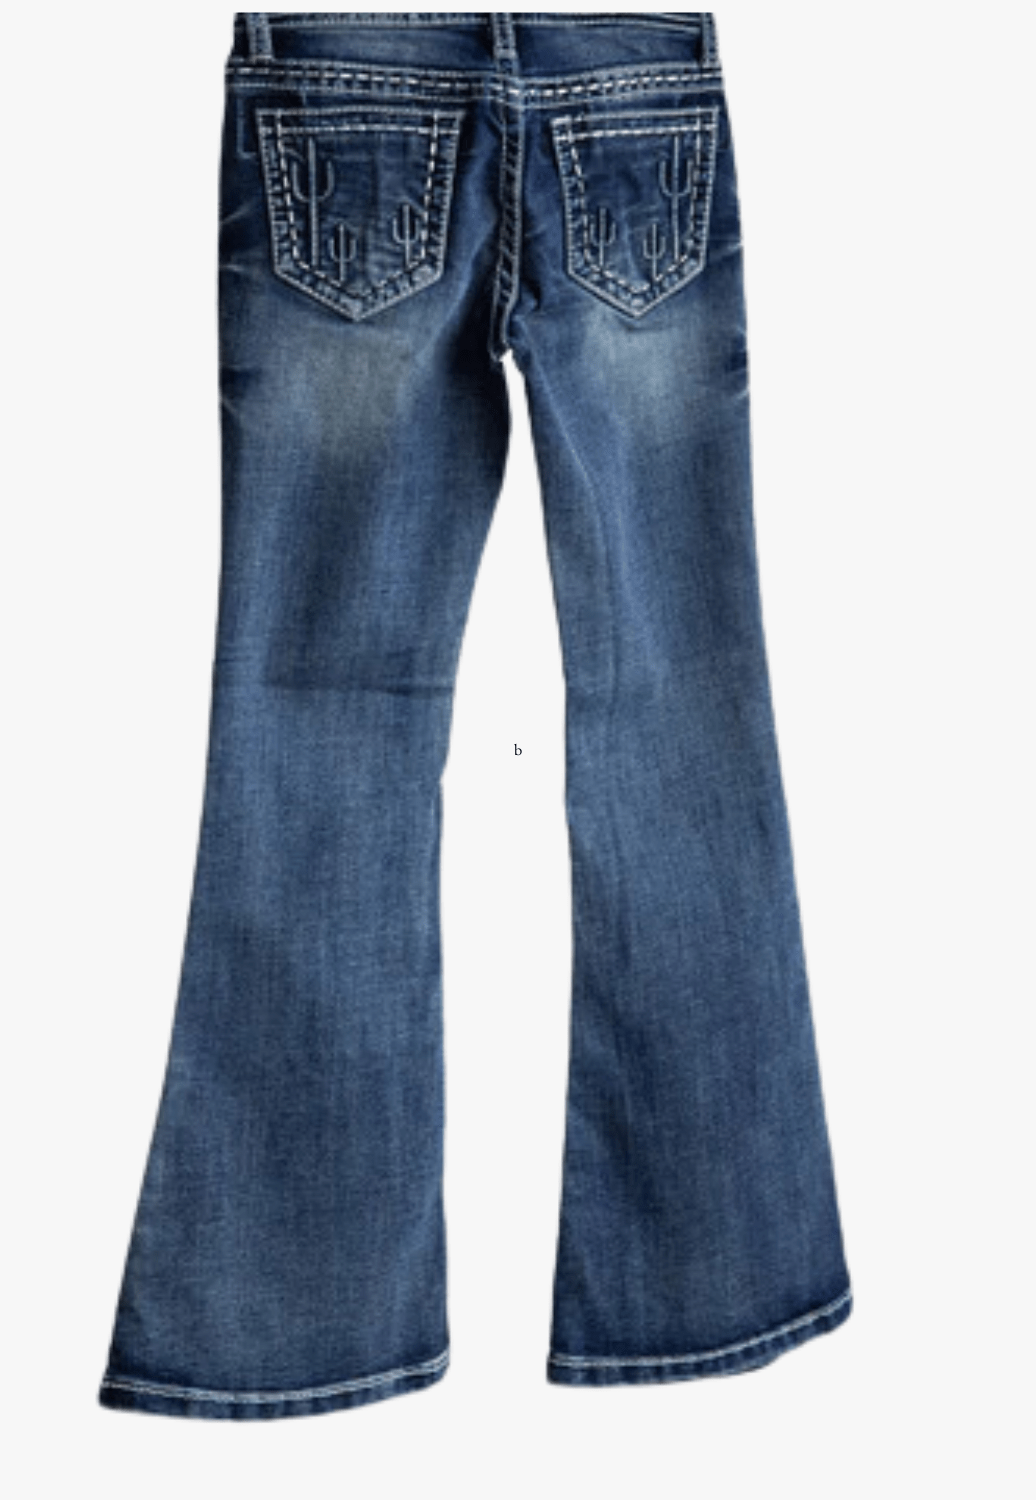 Girls Jeans, Girls Western & Country Jeans